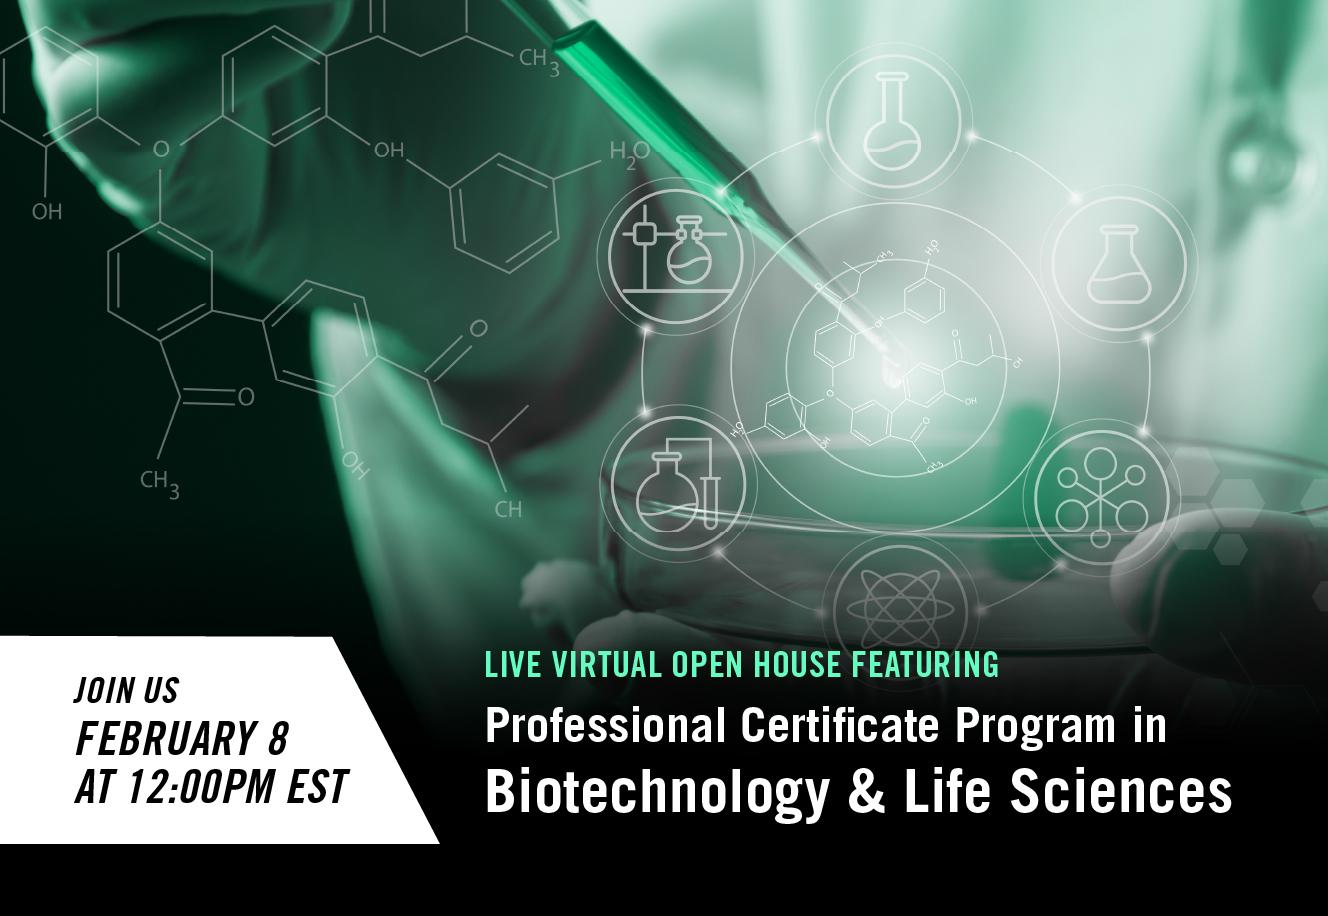 Open House Professional Certificate Program in Biotechnology & Life Sciences